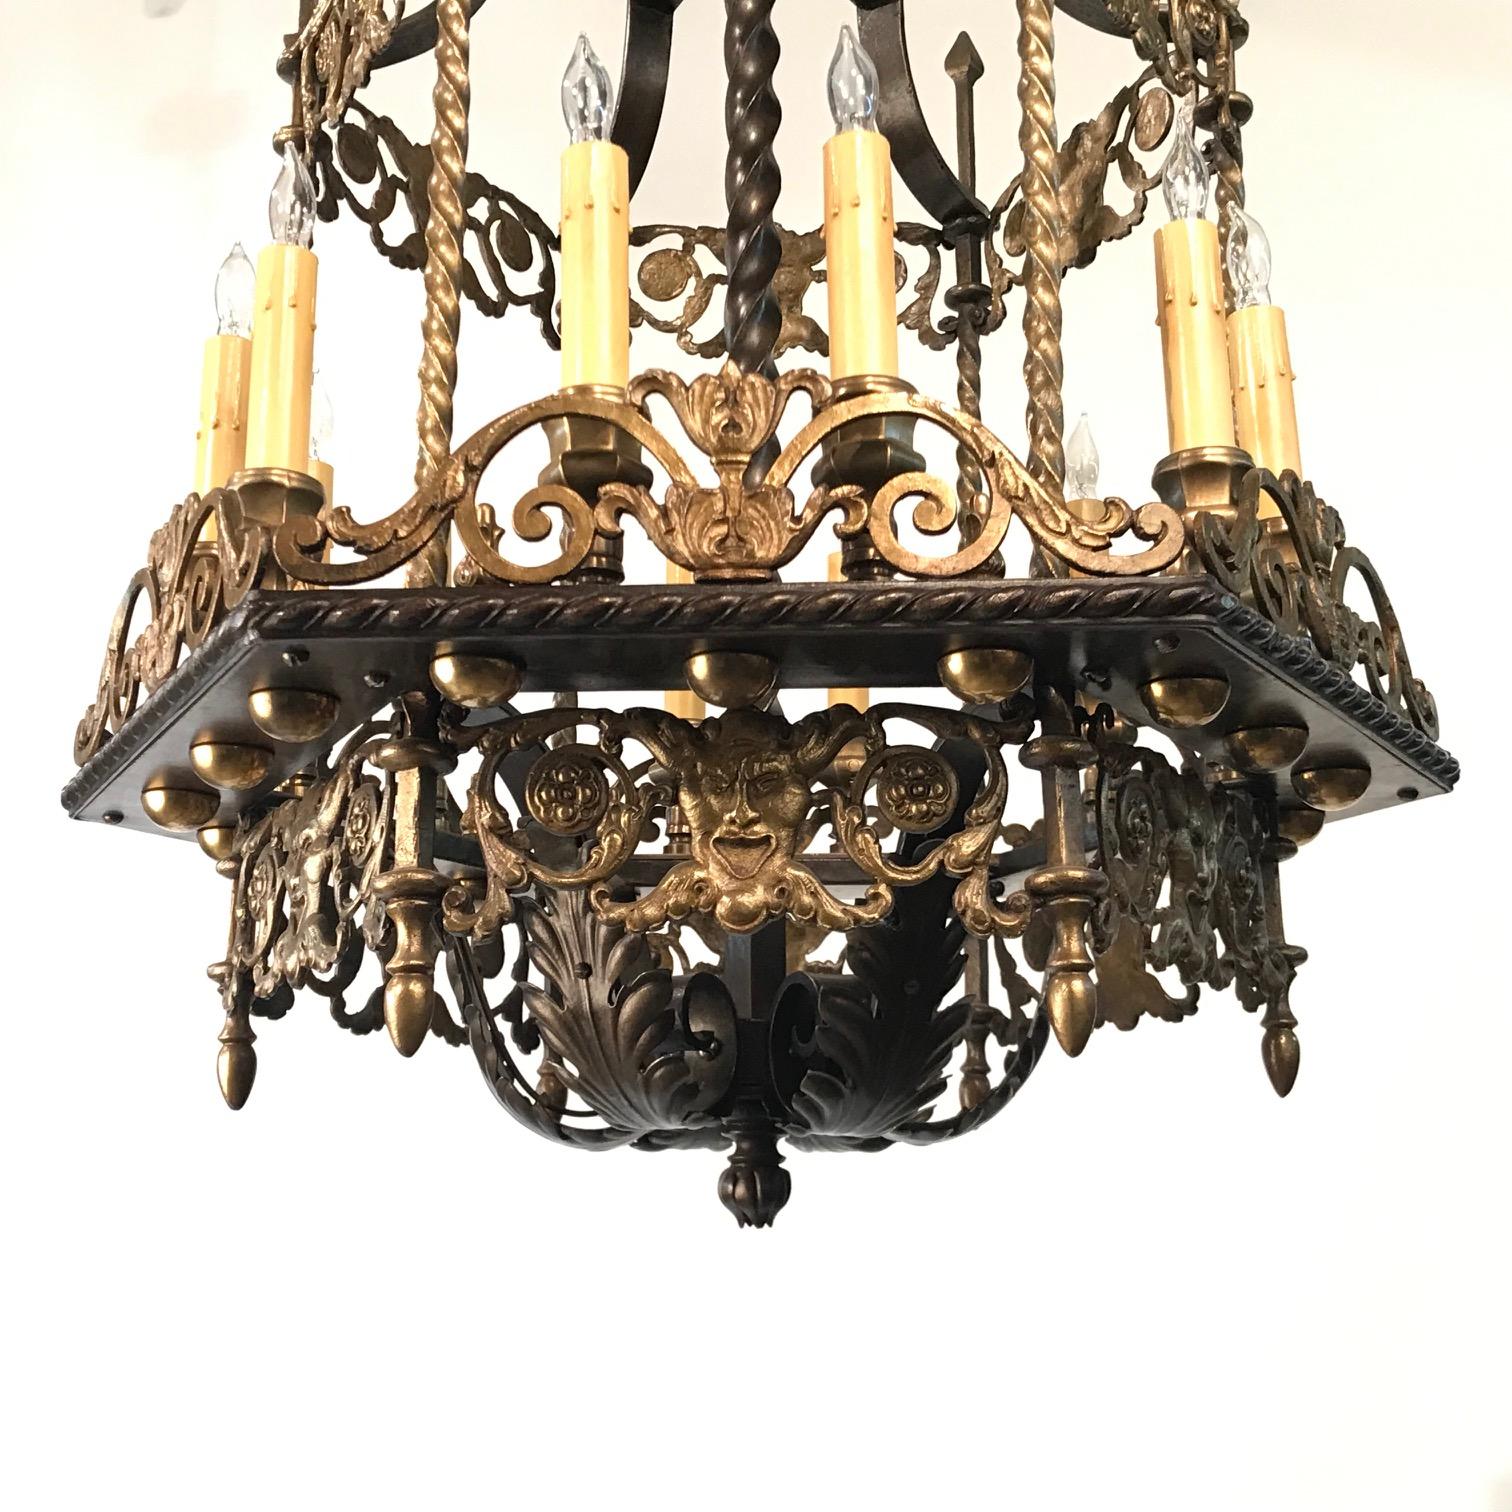 An Antique 12 Light Neo-Renaissance  Bronze and Wrought Iron Chandelier For Sale 3